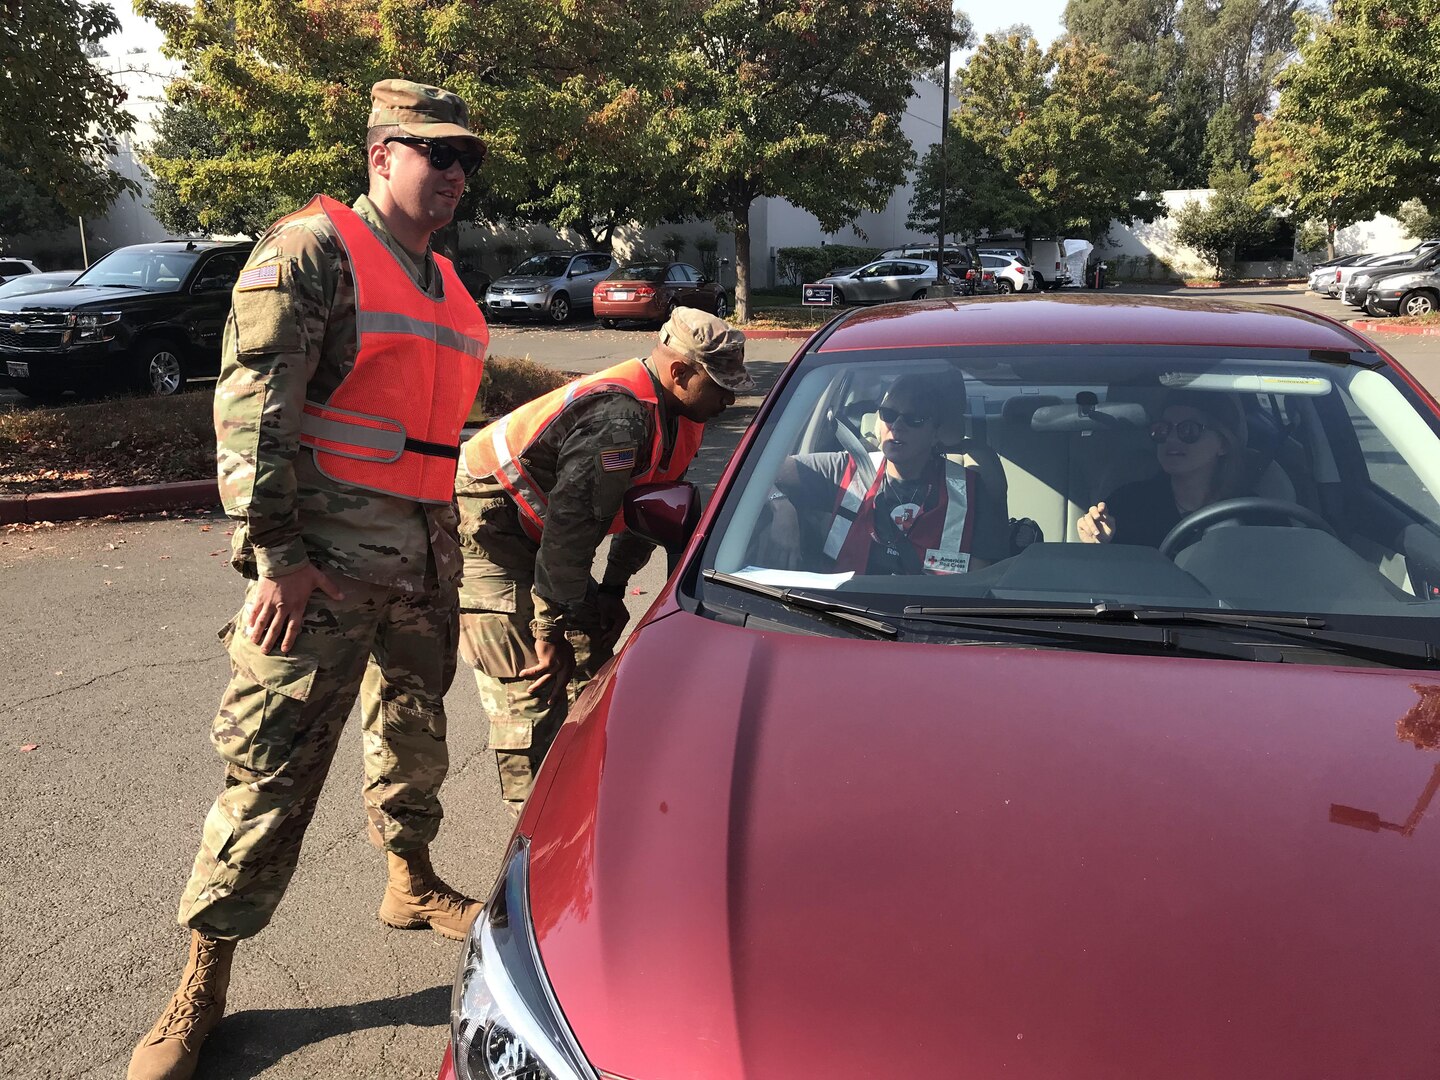 Cal Guard staffed checkpoints during fires